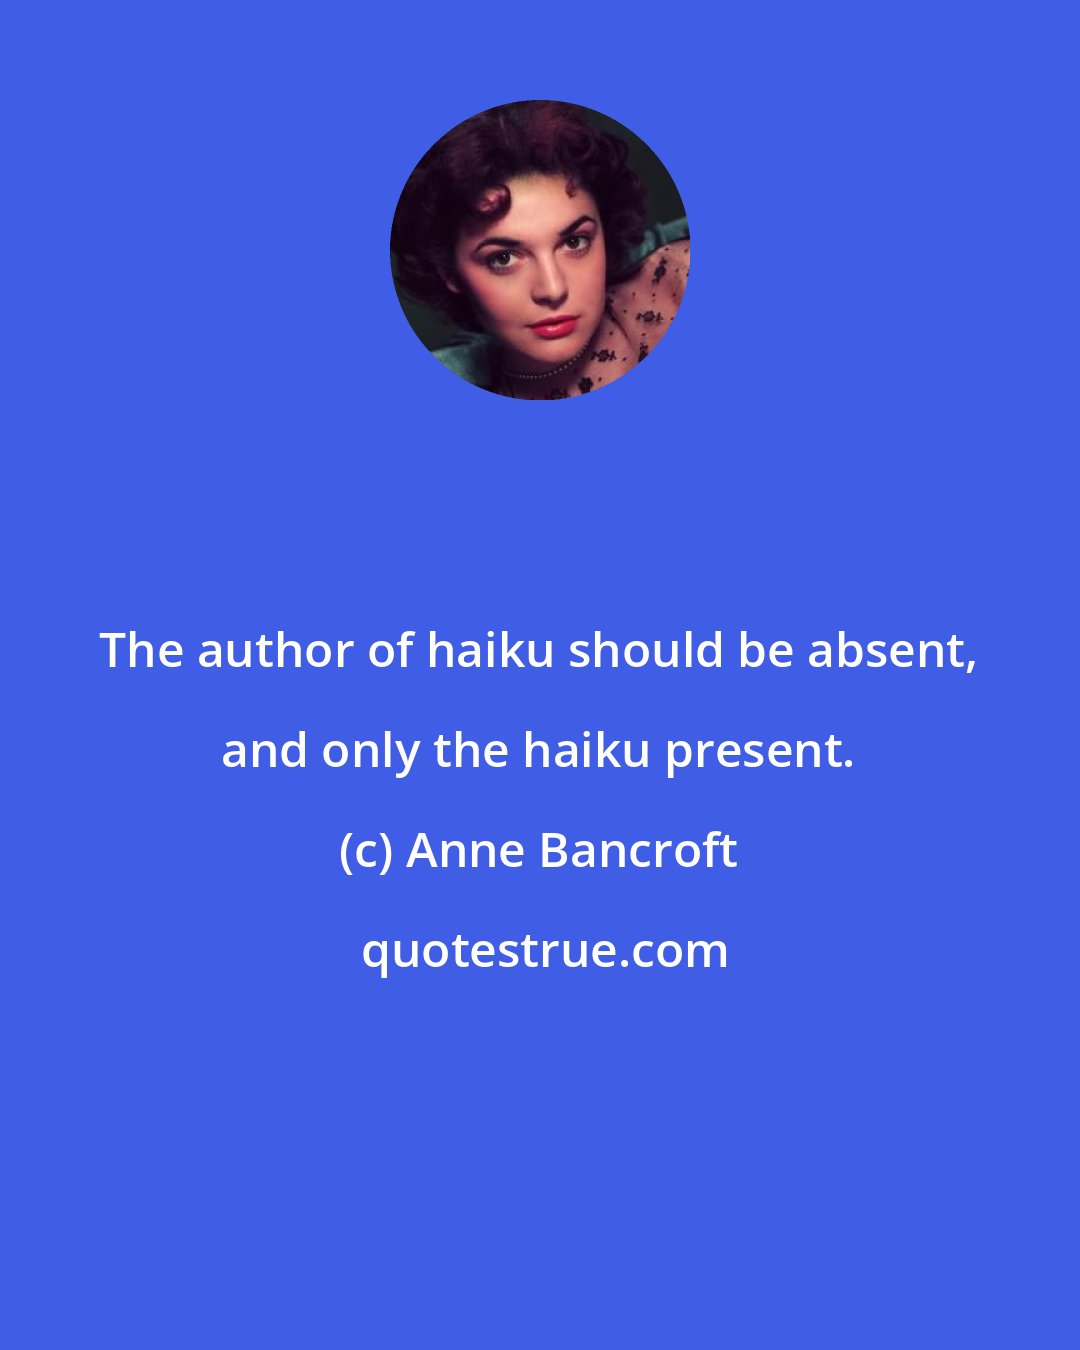 Anne Bancroft: The author of haiku should be absent, and only the haiku present.